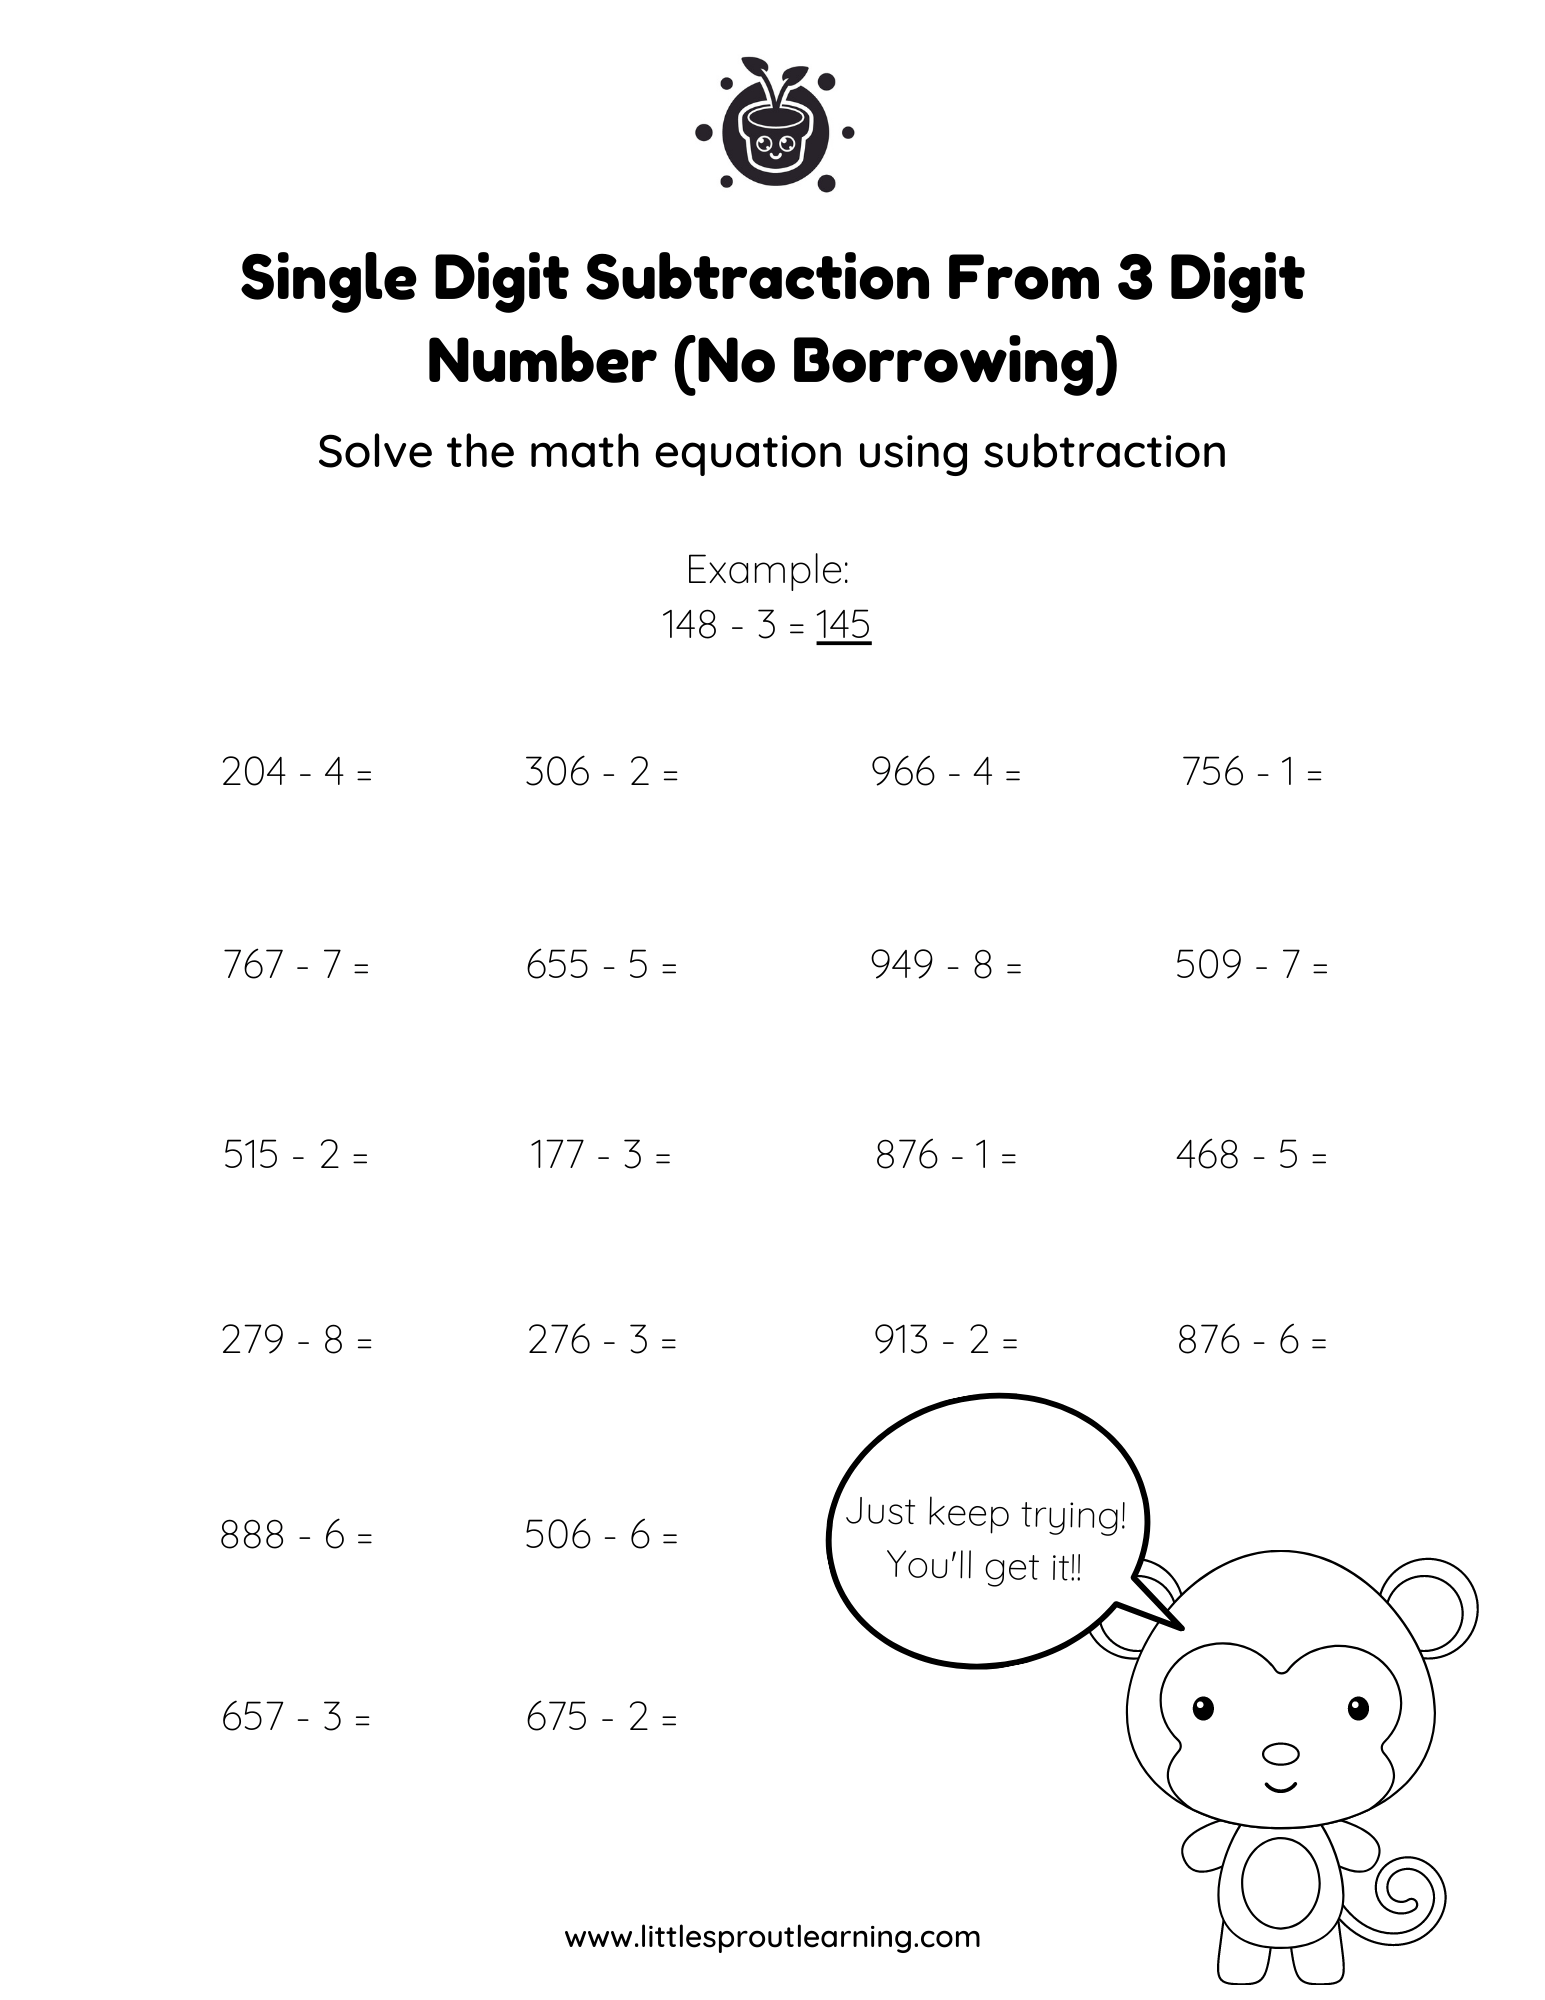 Single Digit Subtraction From 3 Digit – No Borrowing